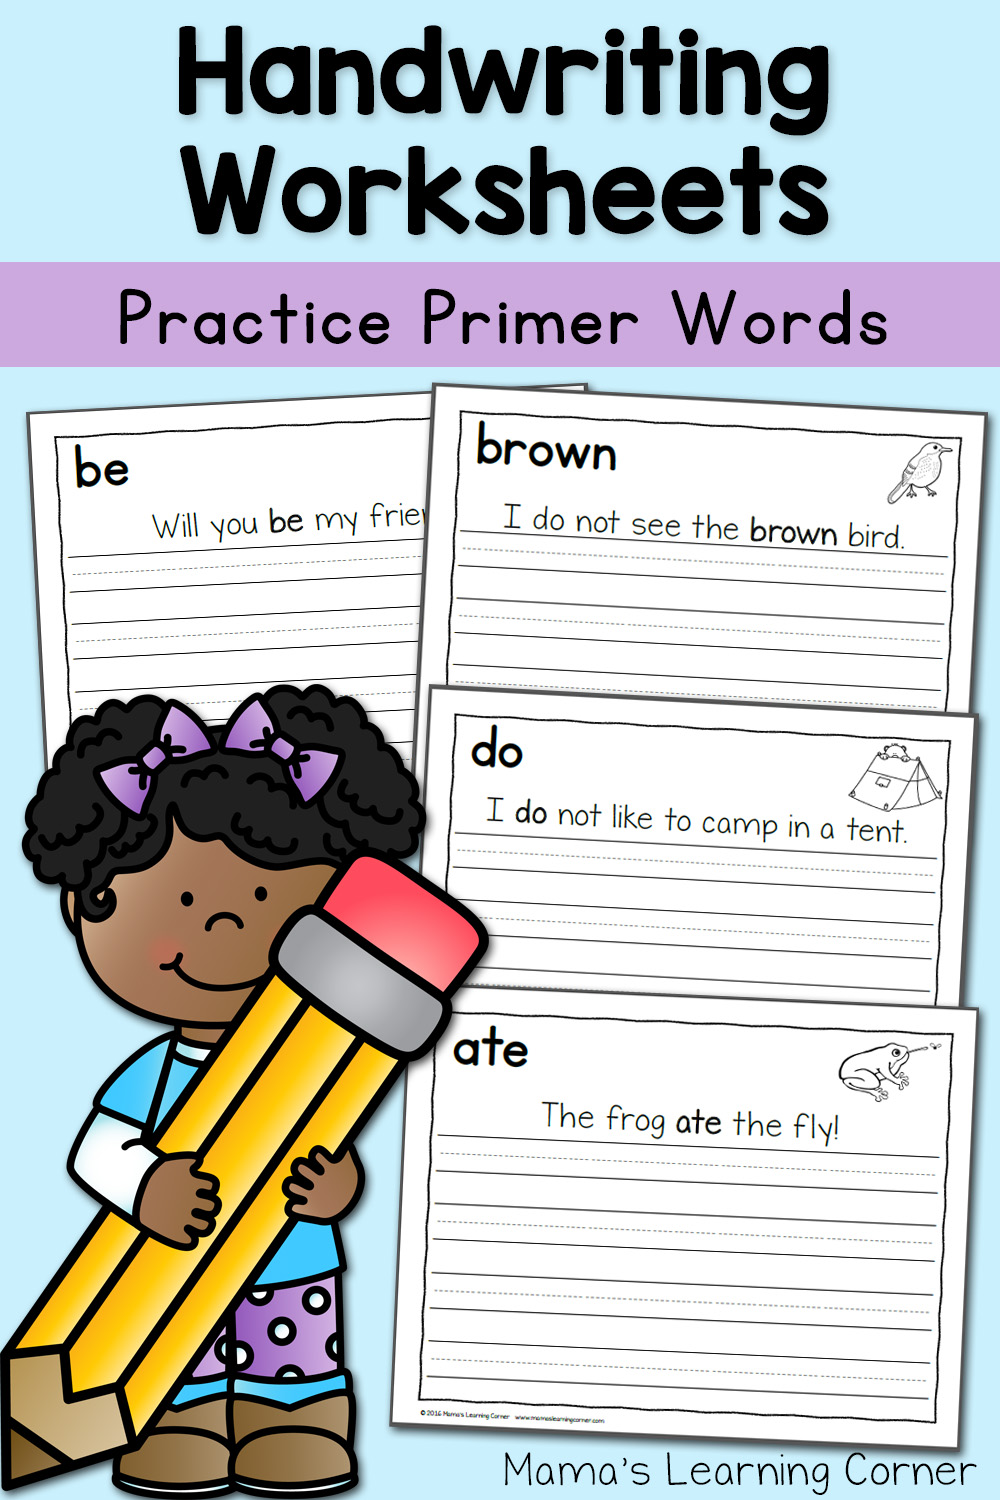 Handwriting Worksheets Primer Sentences - with 4 freebies to download!